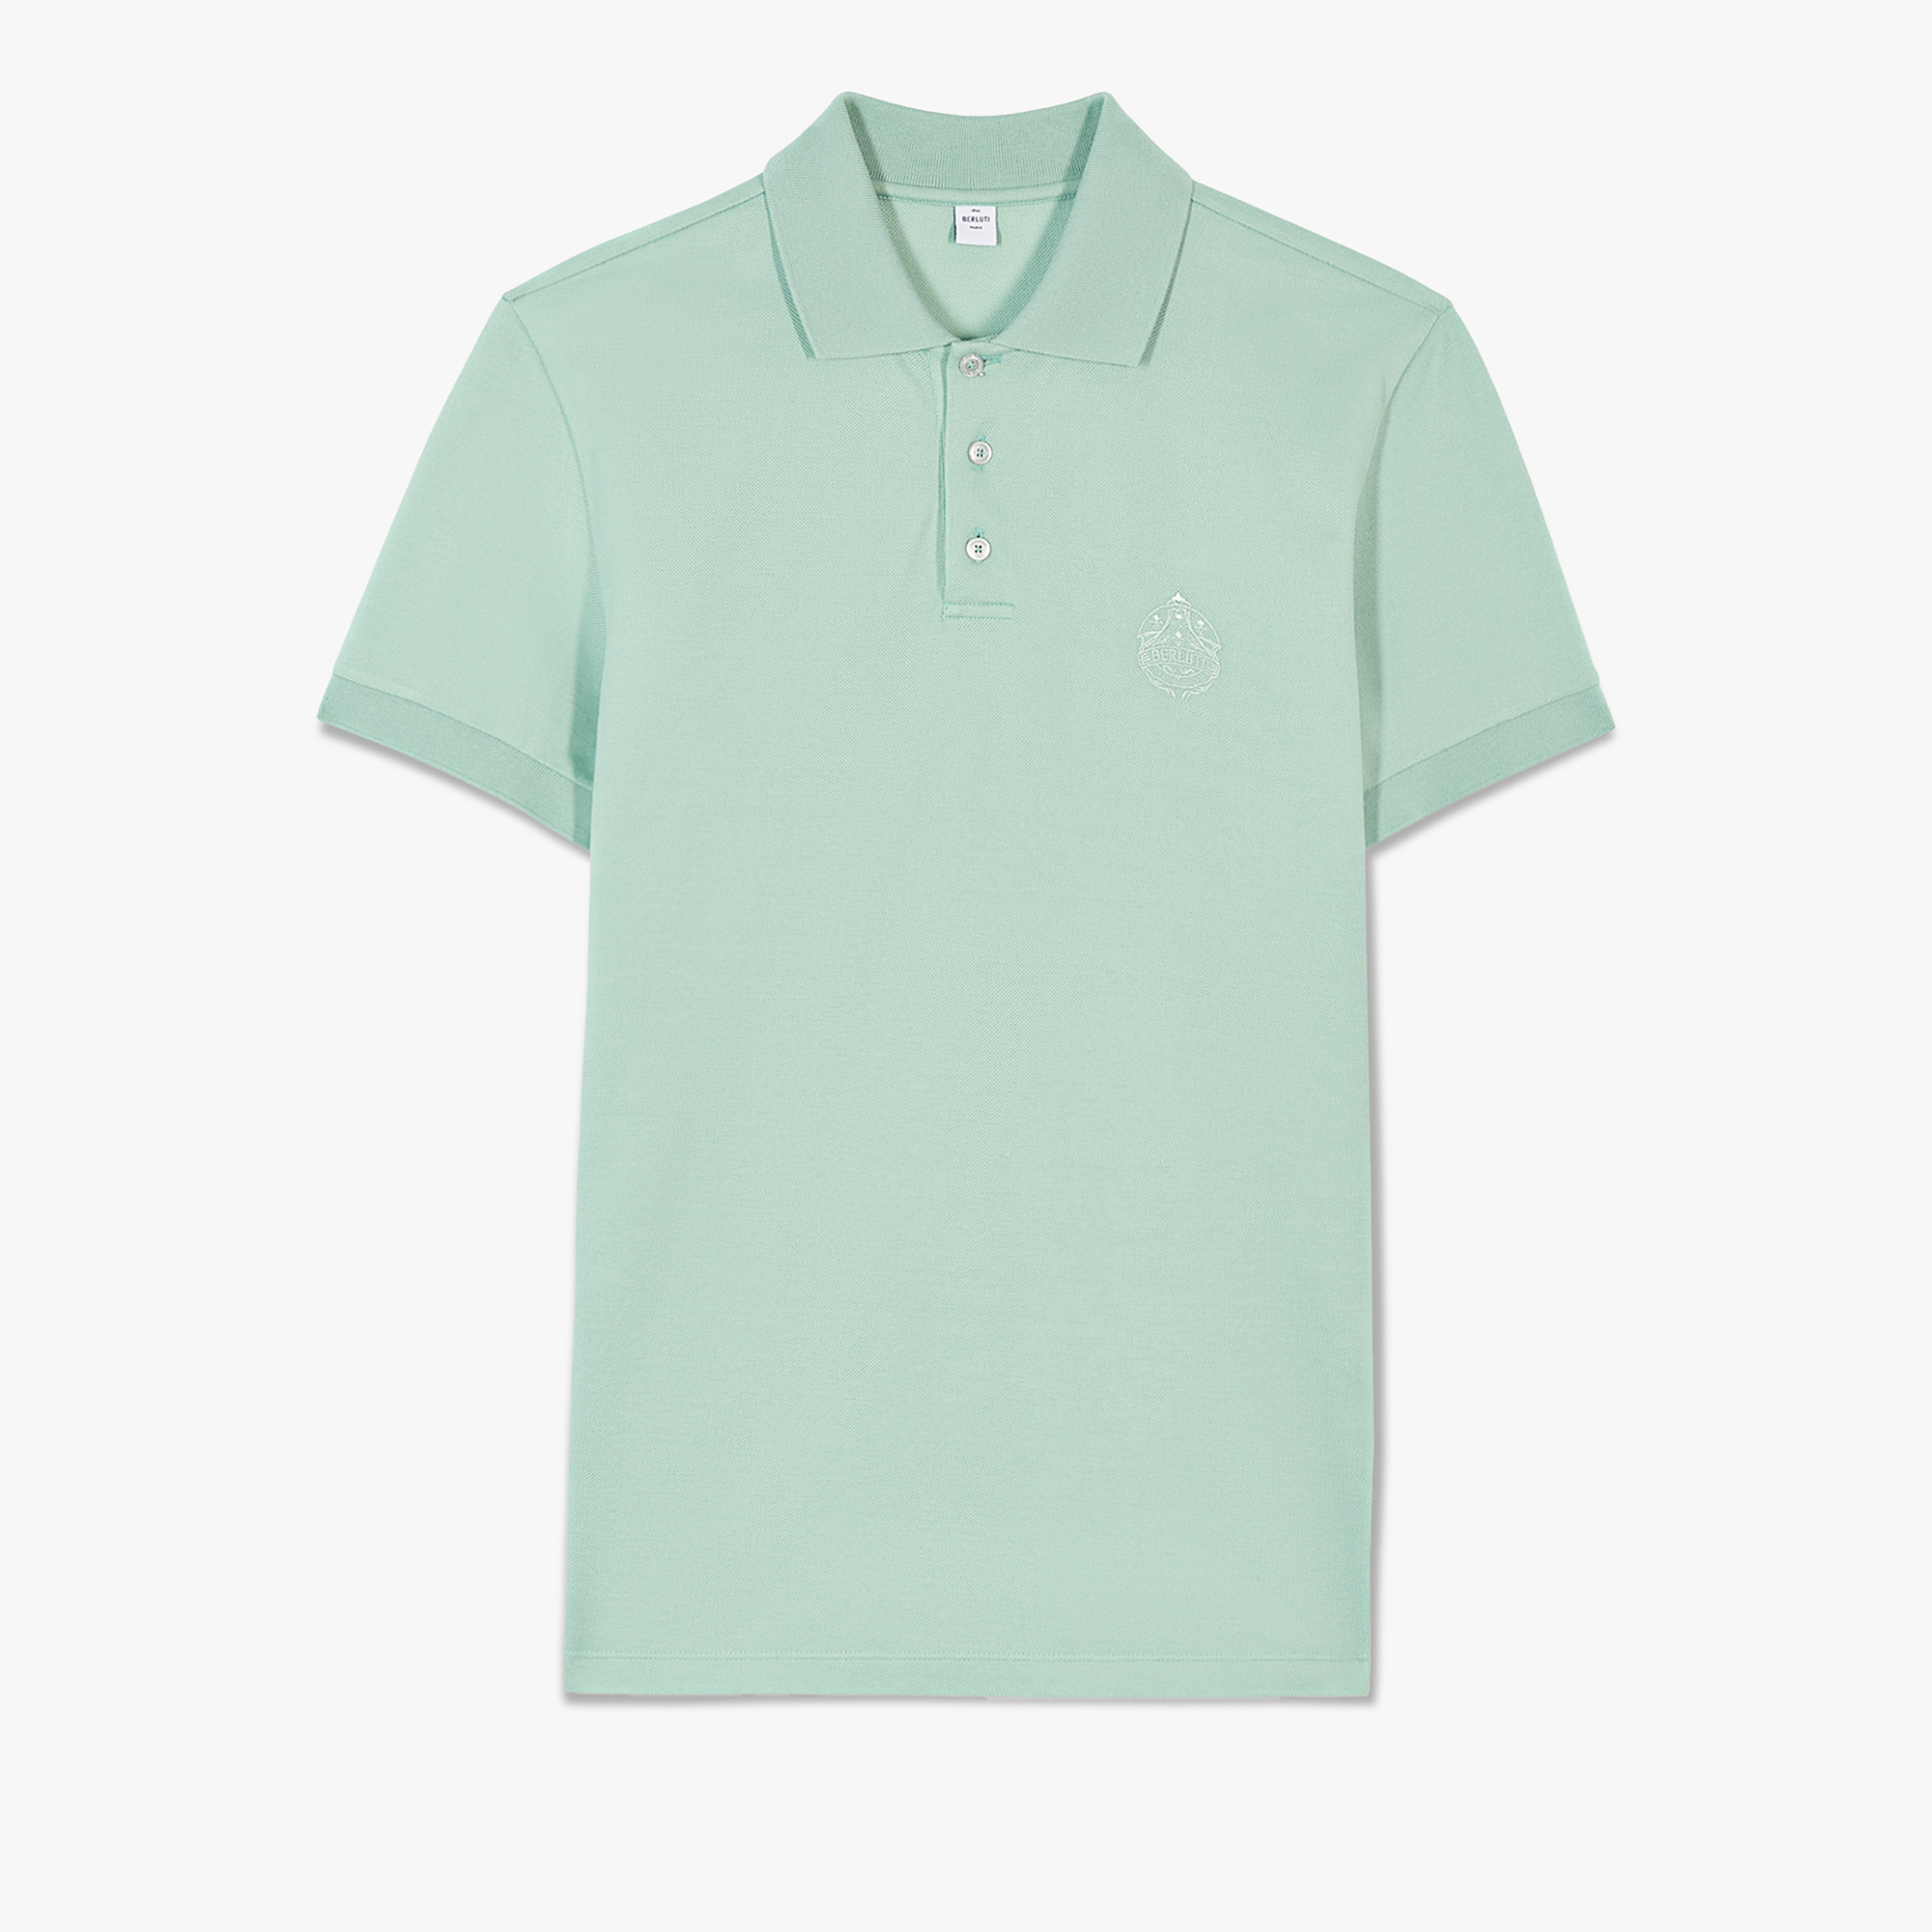 Polo Shirt With Embroidered Crest, ALMOND GREEN, hi-res